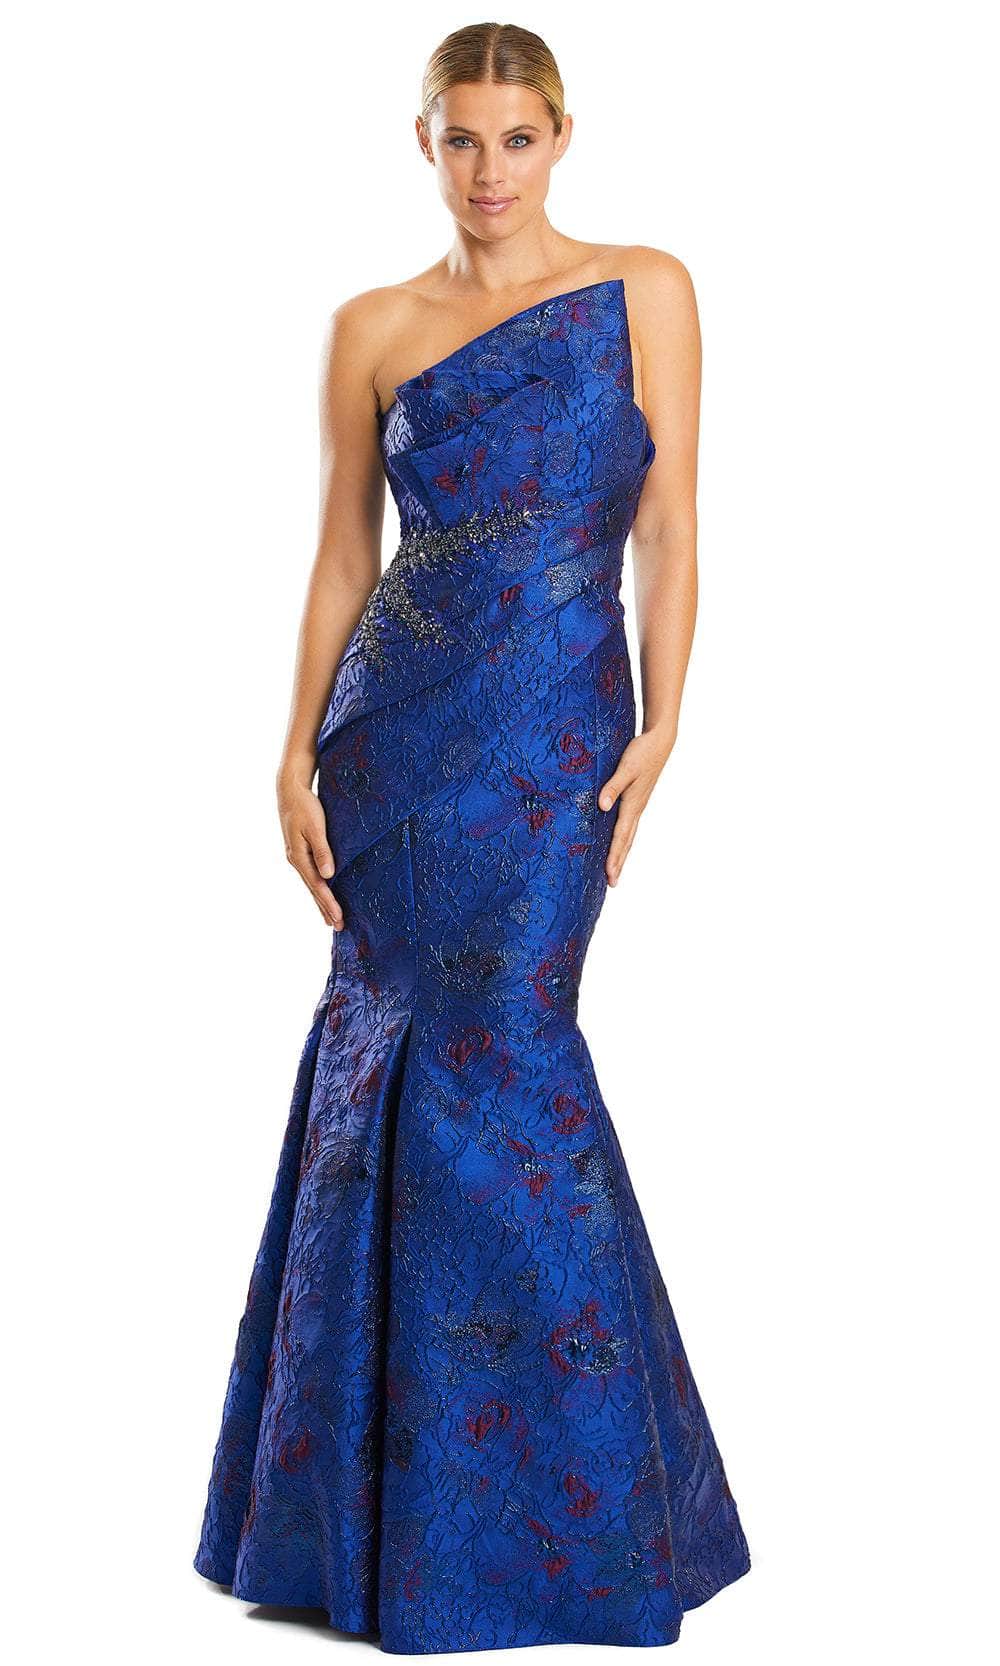 Alexander by Daymor 1865F23 - Mermaid Evening Gown